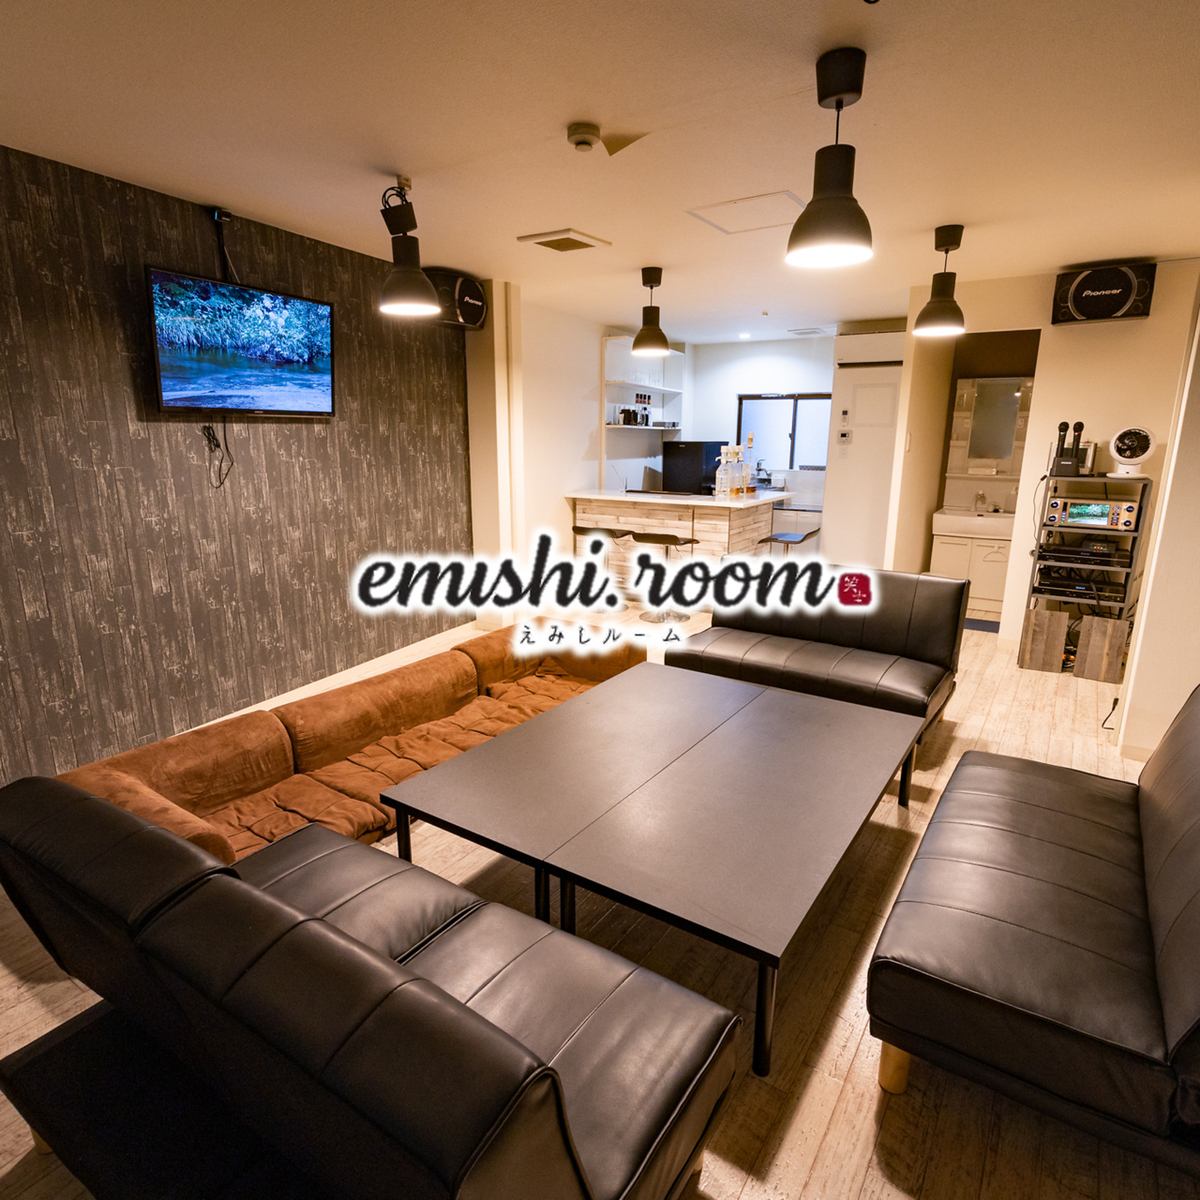 Enjoy a home party ◎ Equipped with karaoke, DVD player, projector, etc. ♪